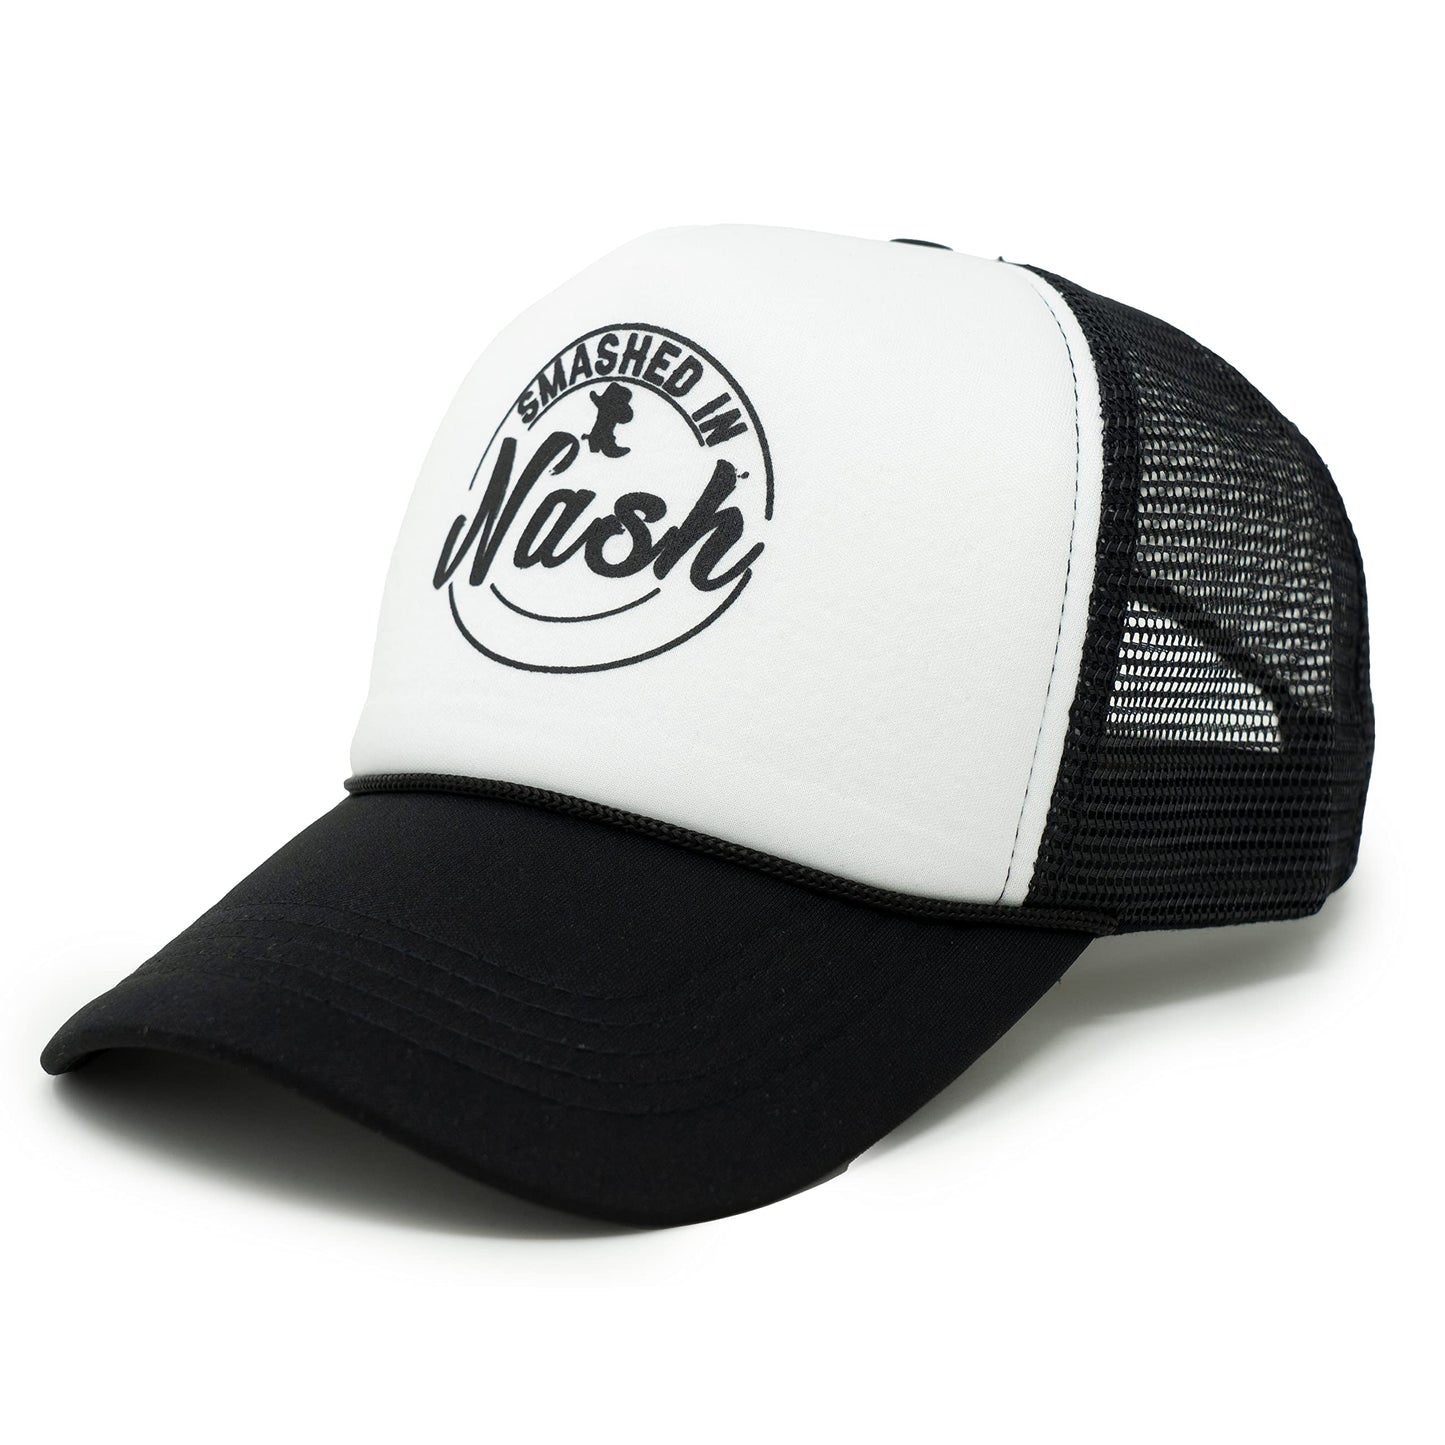 Nash Bachelorette Trucker Hats by Funky Junque